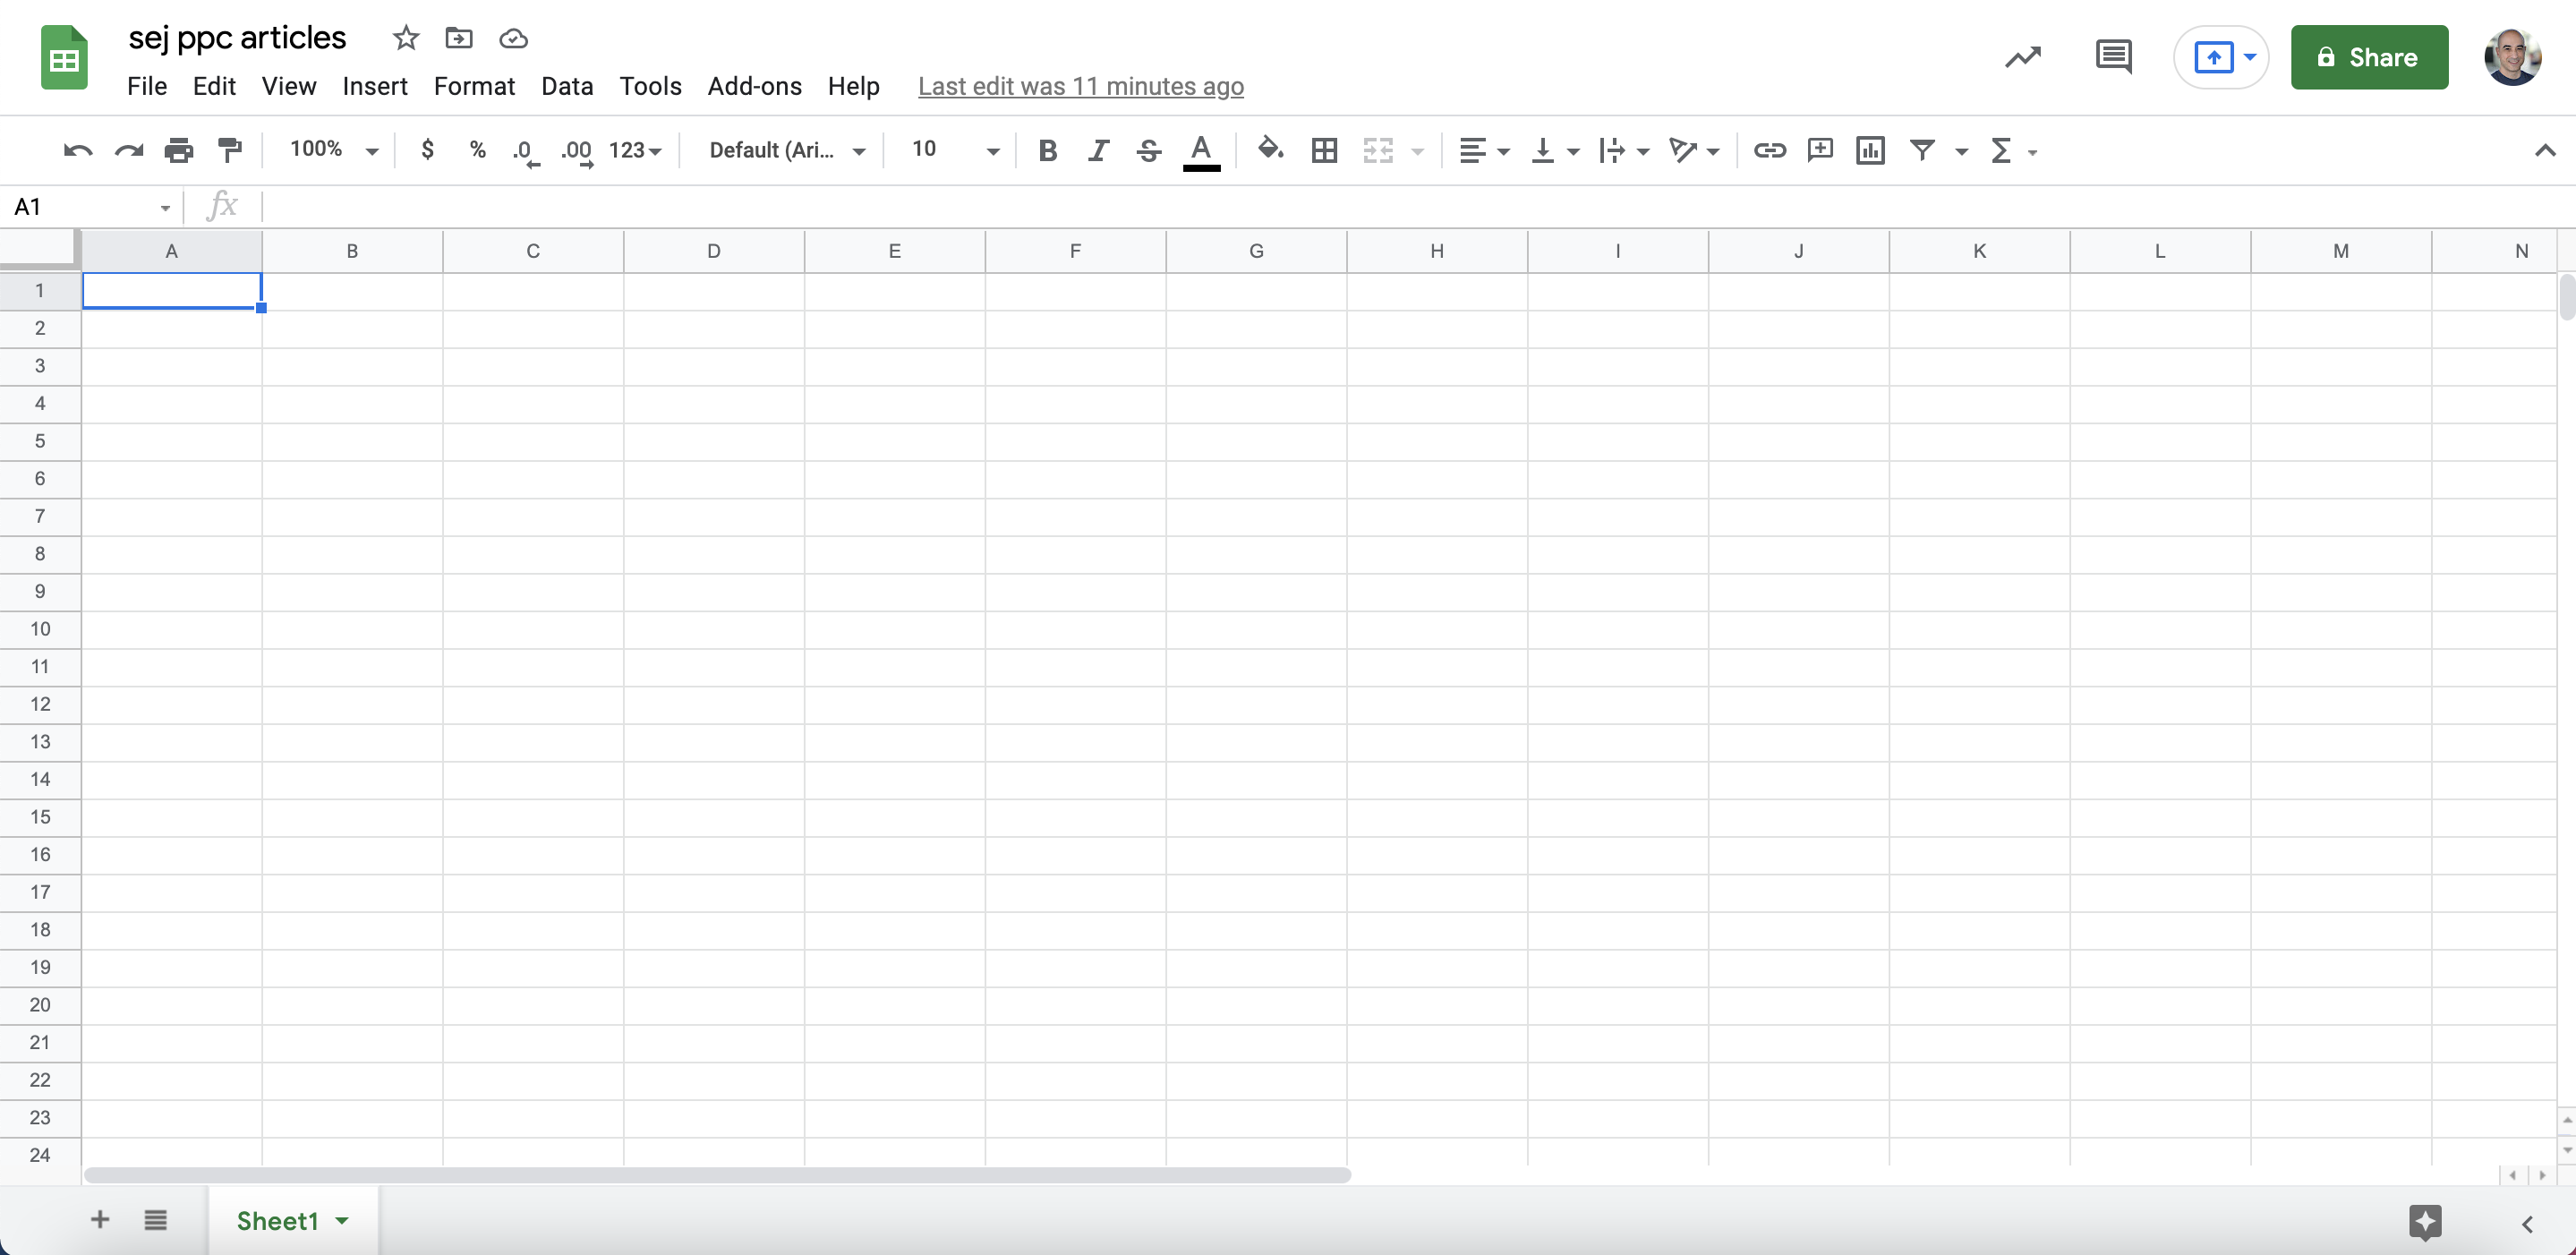 How To Use Google Sheets For Web Scraping & Campaign Building